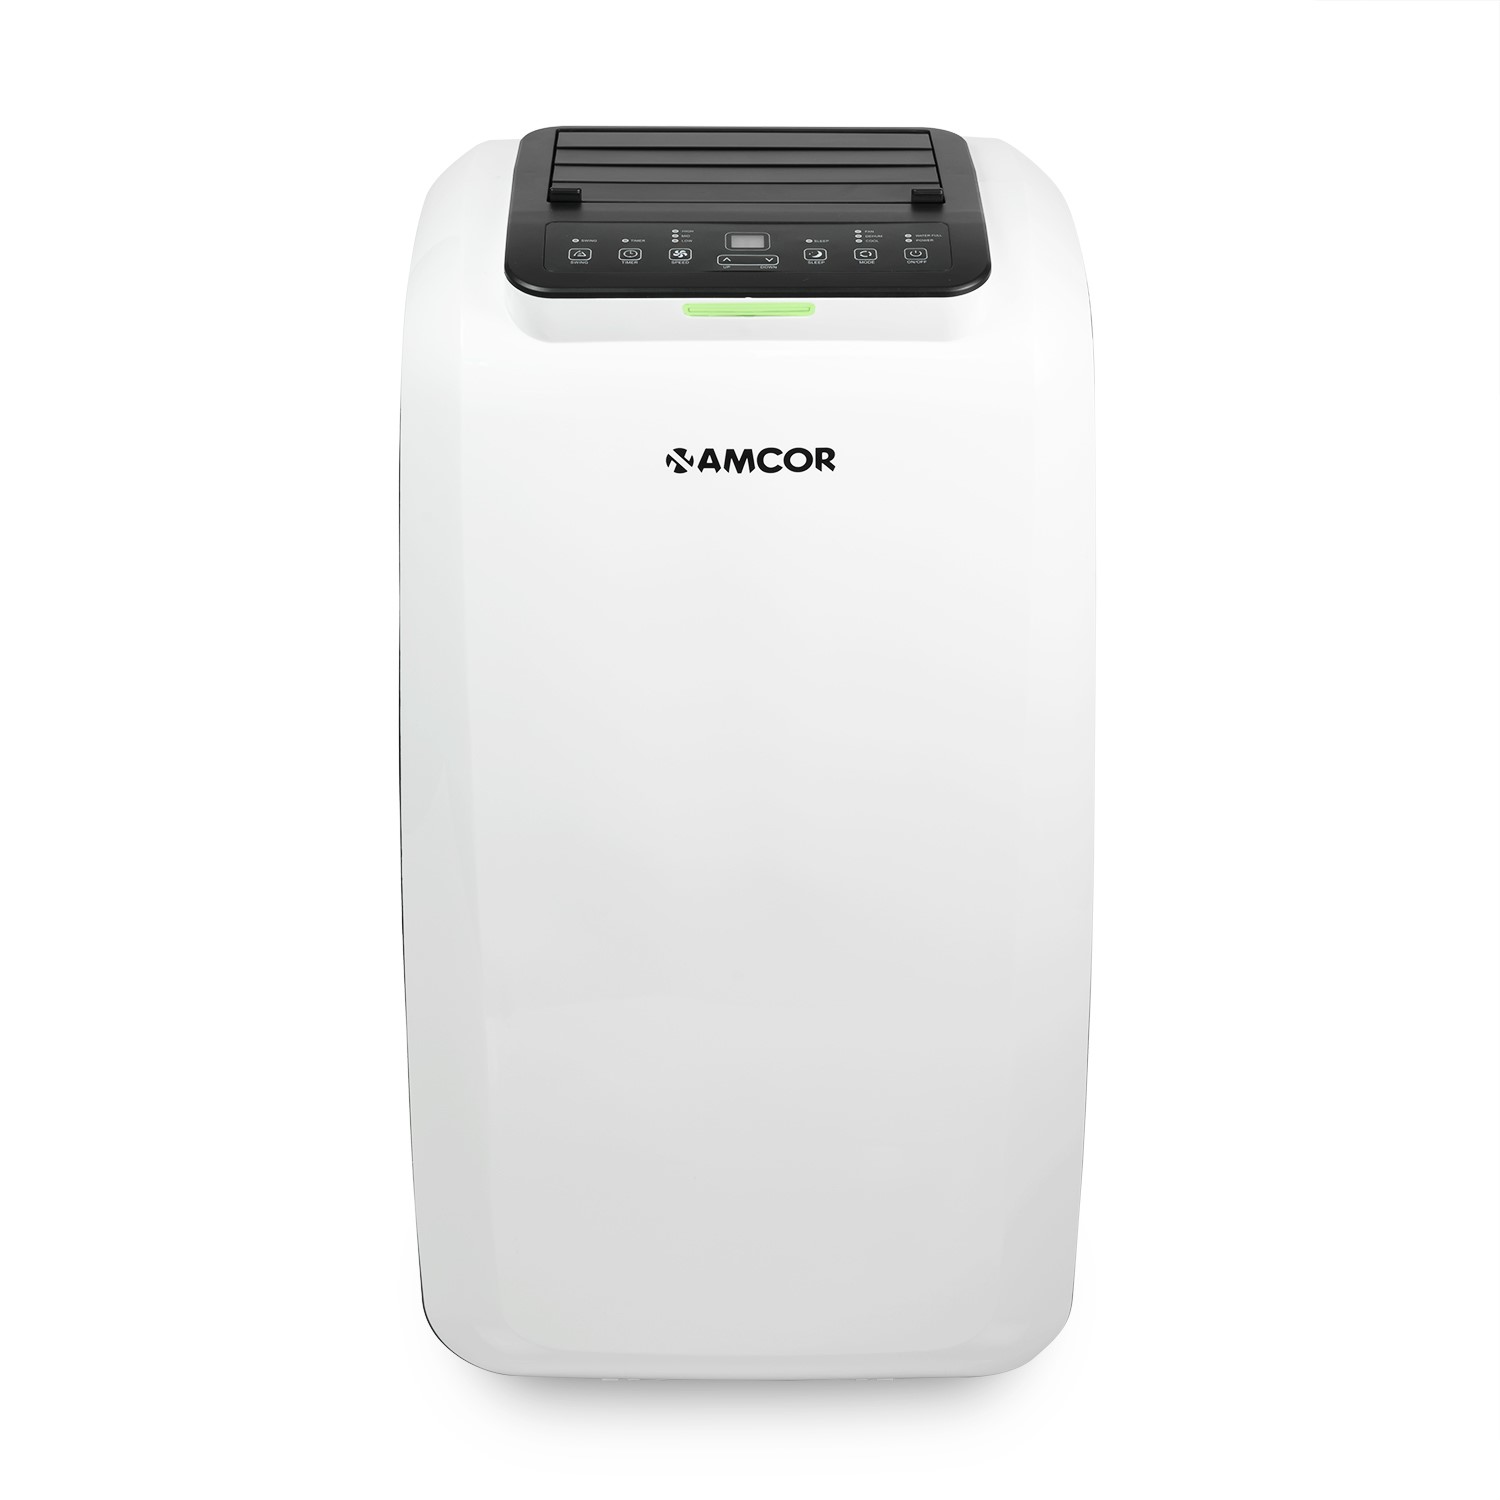 Refurbished Amcor 12000 BTU Portable Air Conditioner for rooms up to 30 sqm.